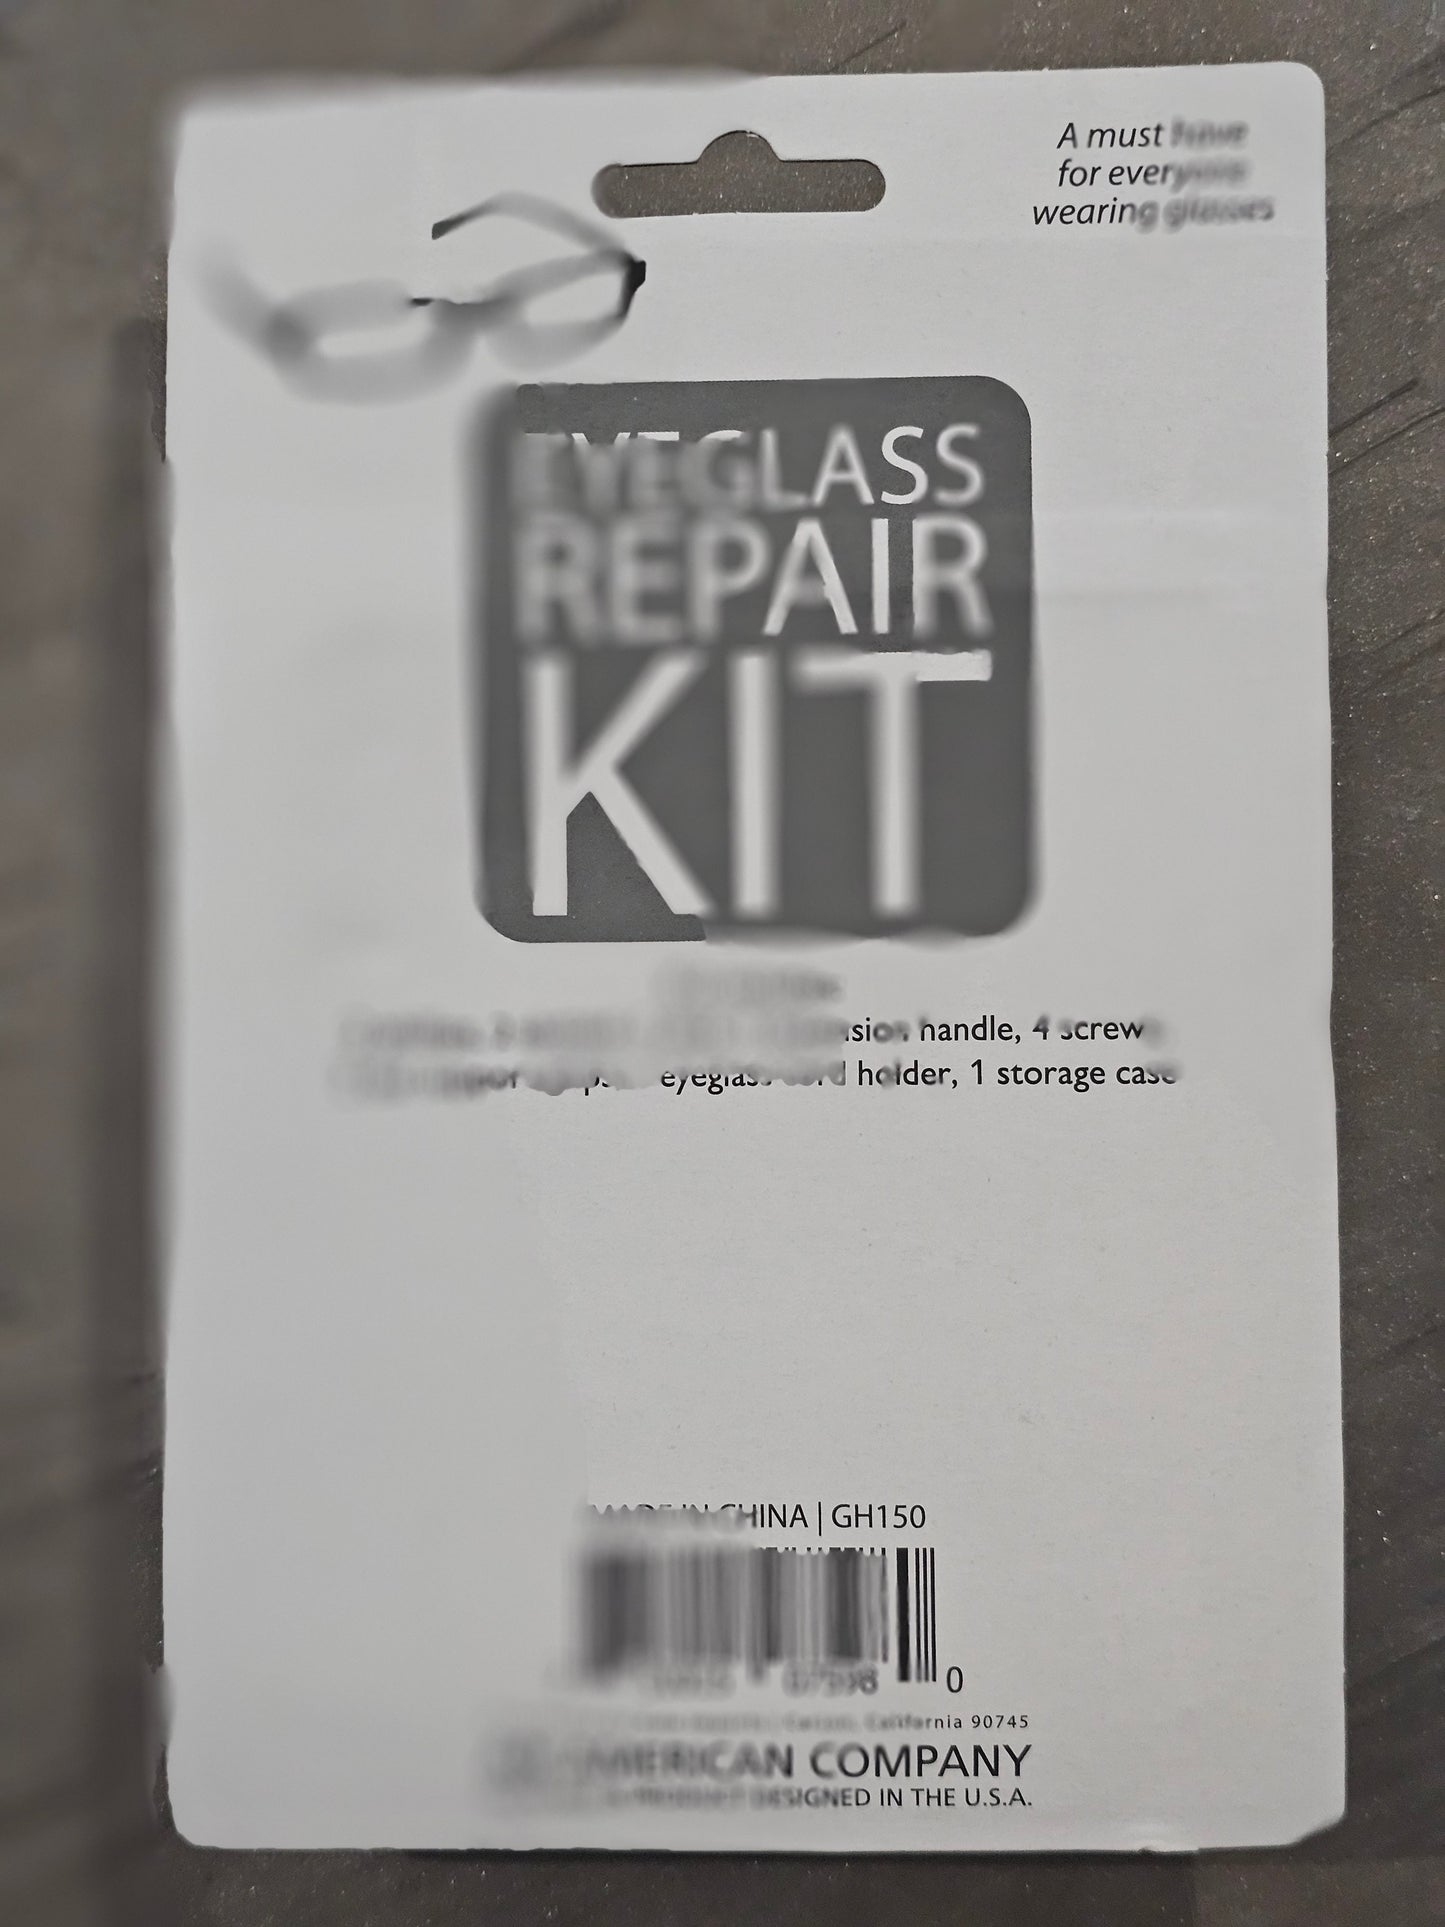 Fix your Frames with Ease: The Ultimate Eyeglass Repair Kit